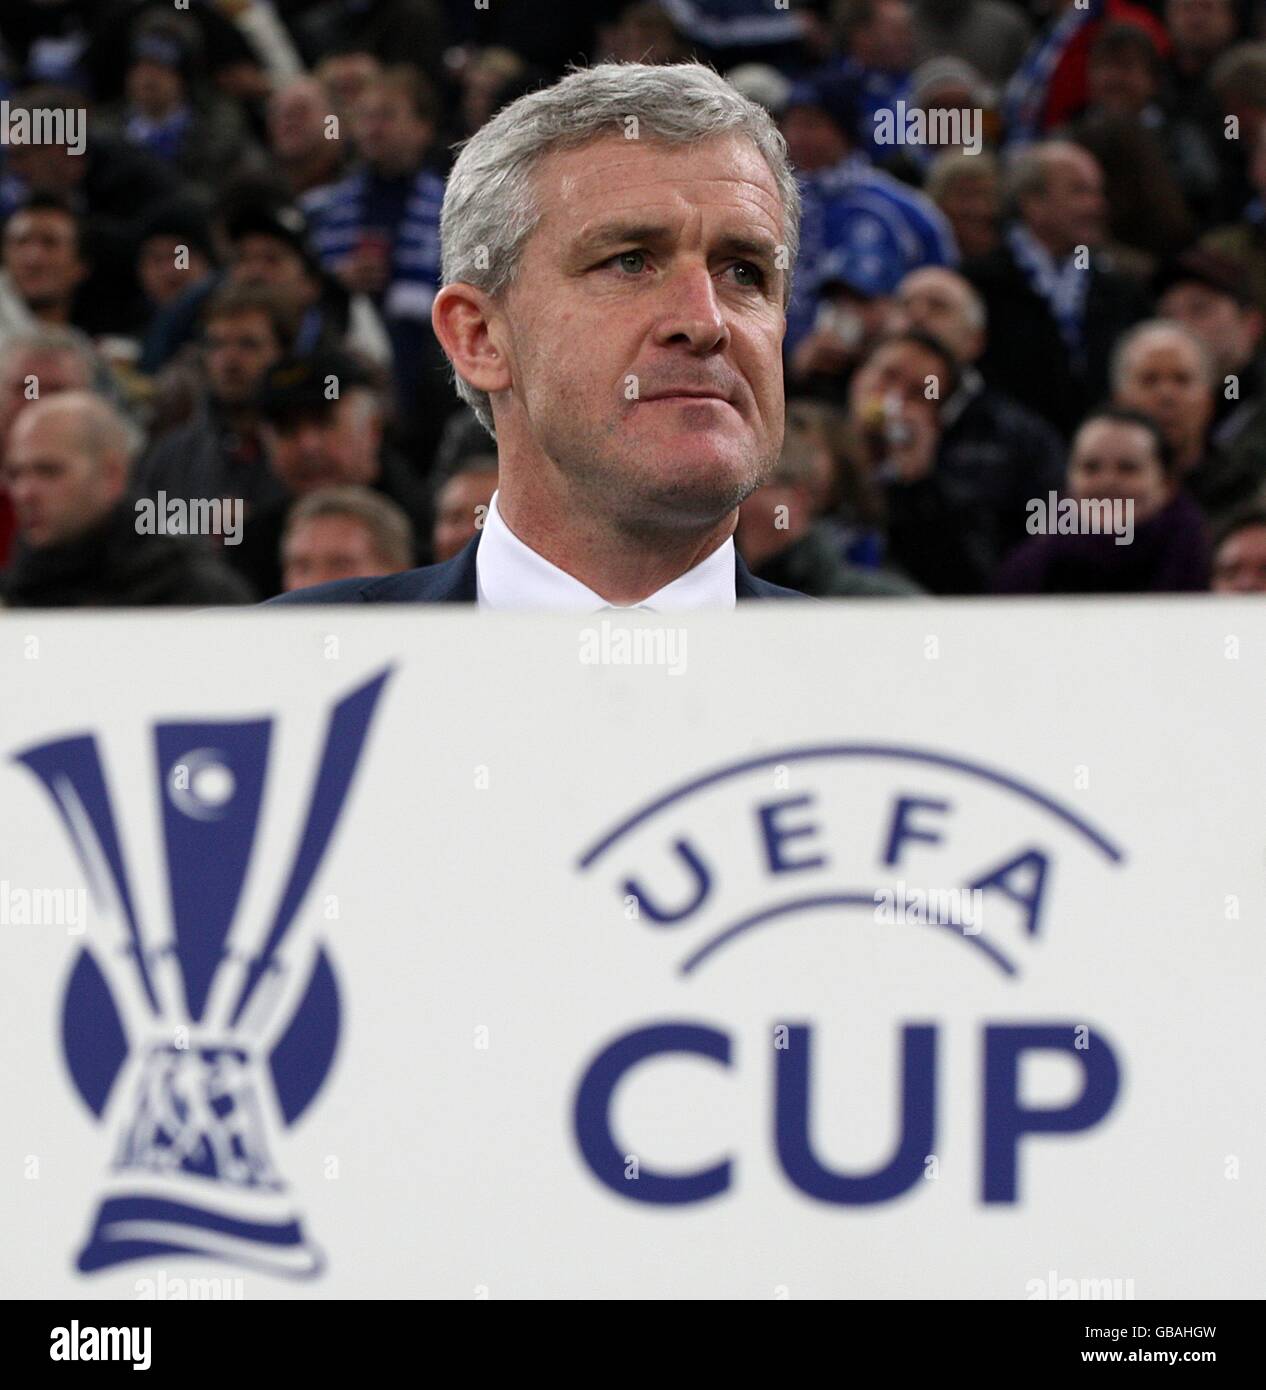 Soccer - UEFA Cup - Group A - FC Schalke 04 v Manchester City - Veltins-Arena. Manchester City manager Mark Hughes stands behind the Uefa Cup logo on the touchline Stock Photo